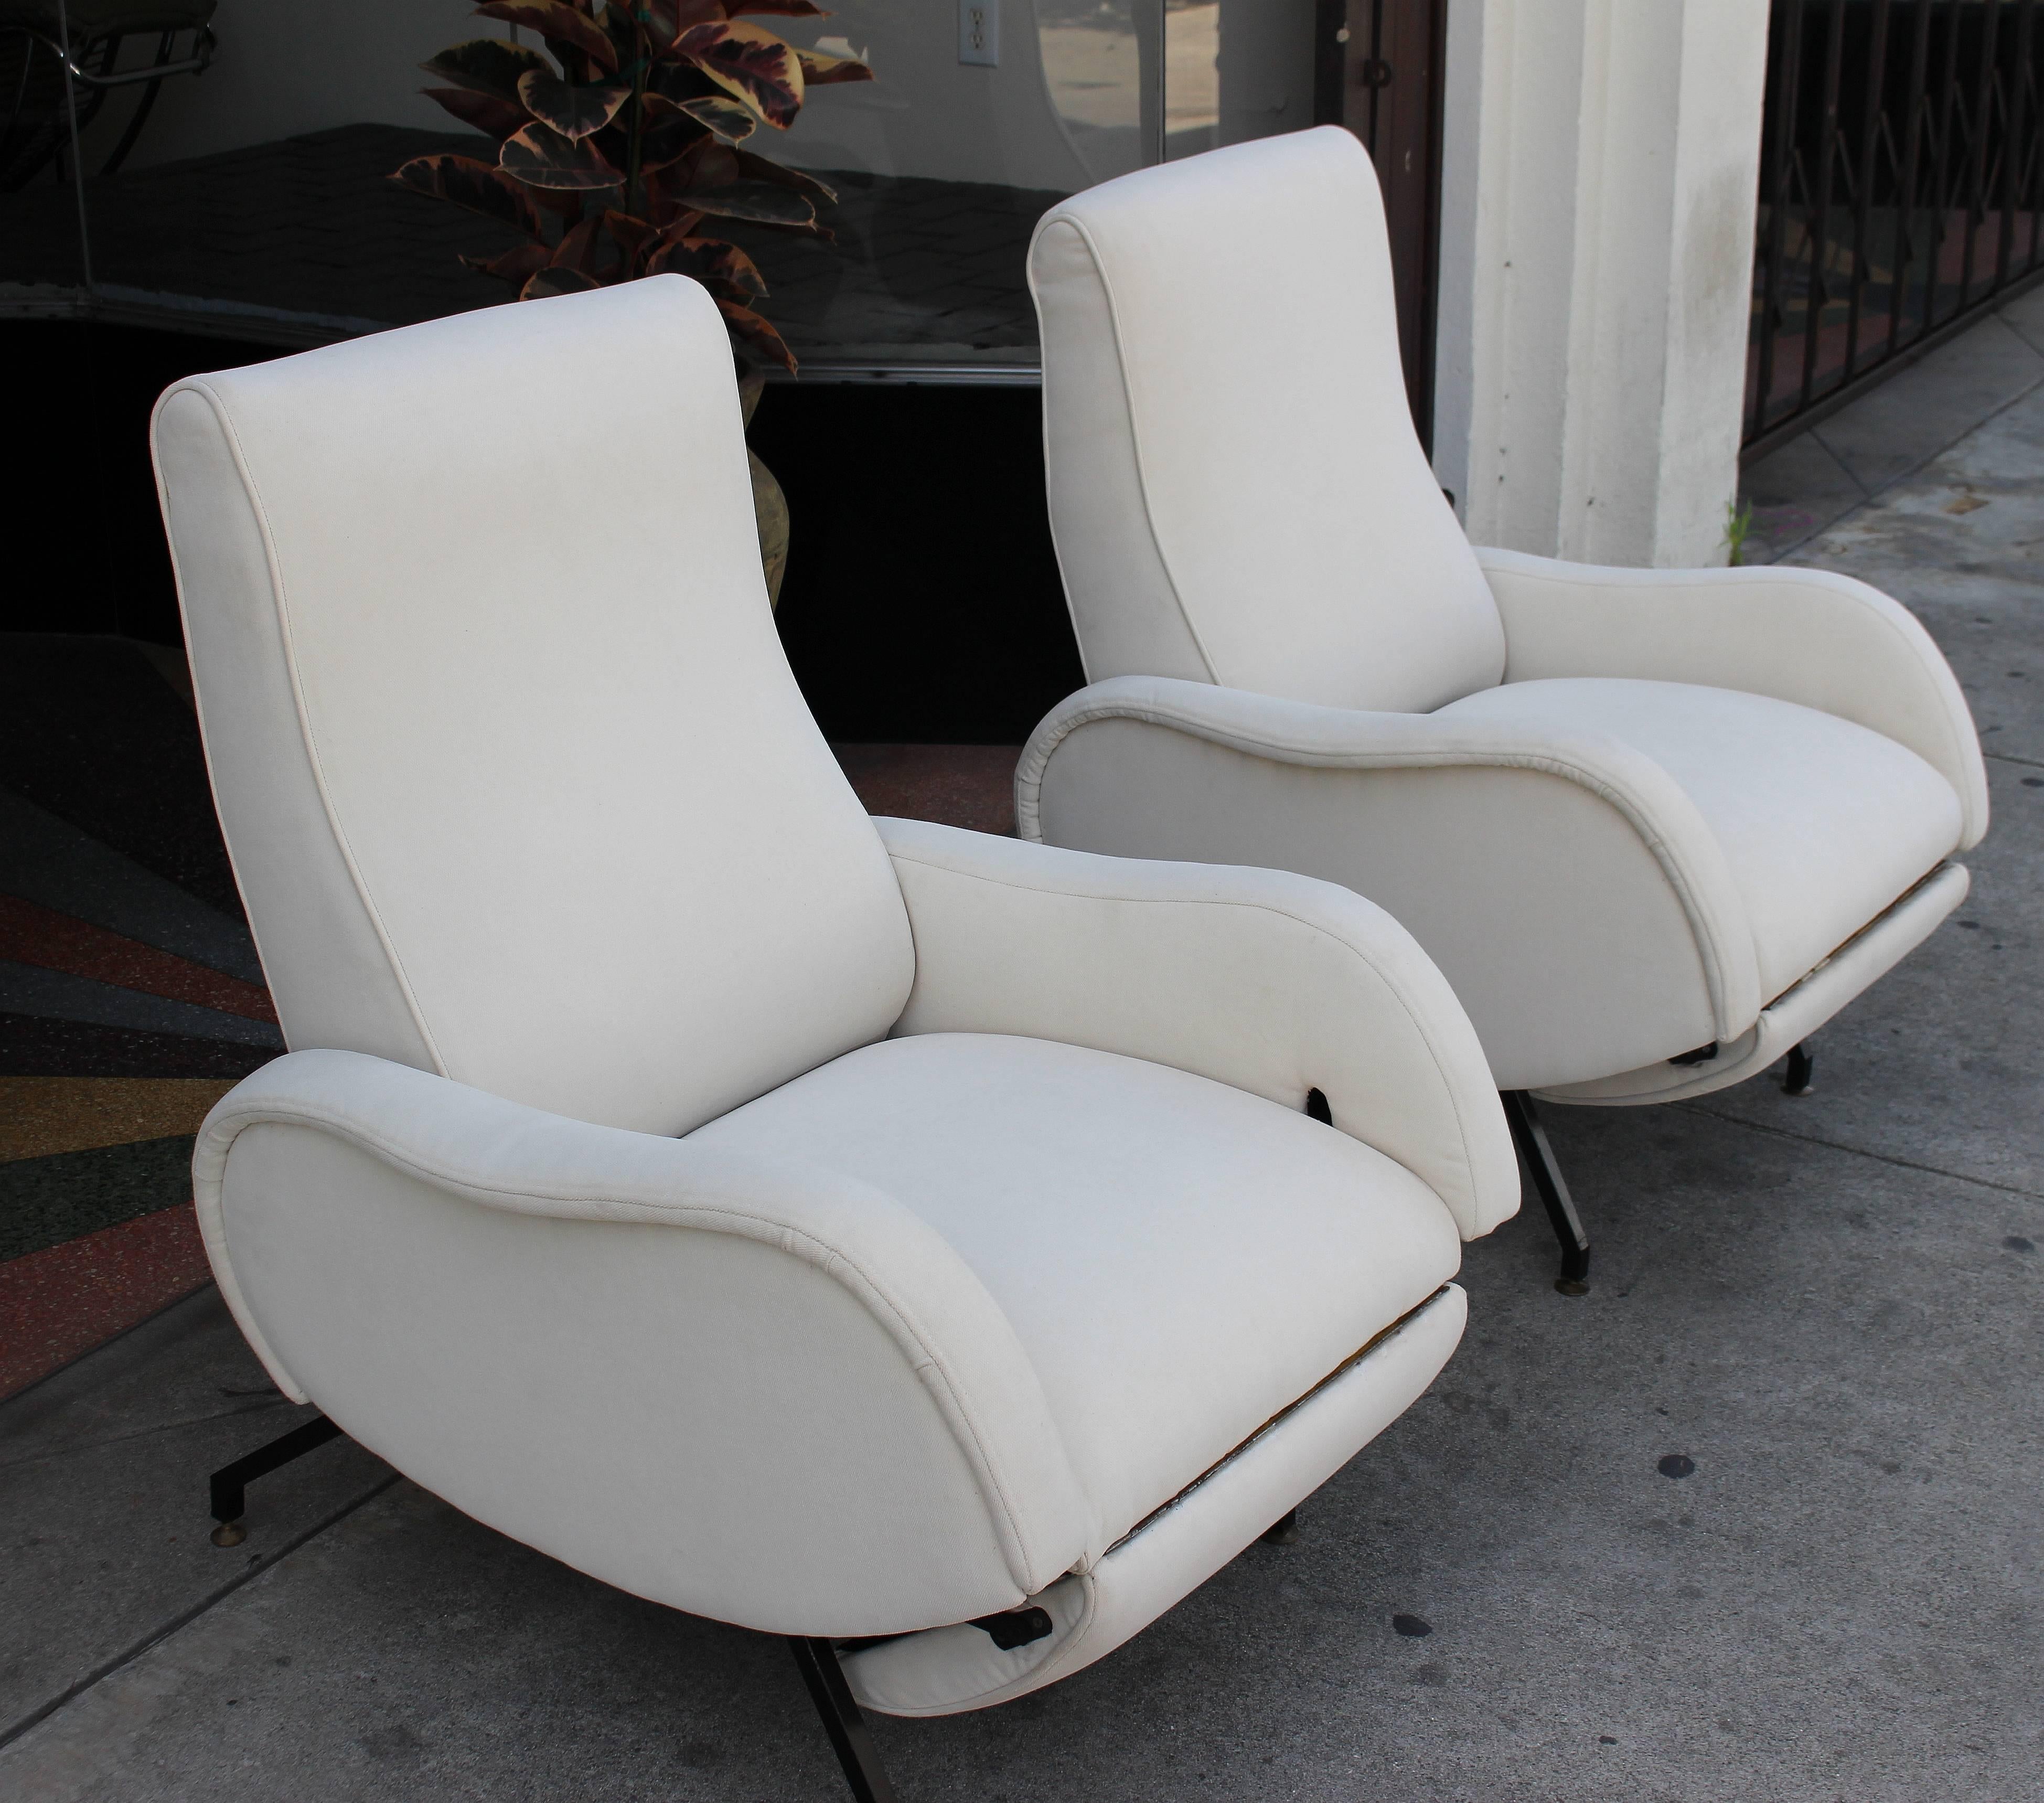 1950s Italian recliner chairs, new upholstered and refurbished. Metal legs and brass bouts. Chairs total extended length is 60 inches.